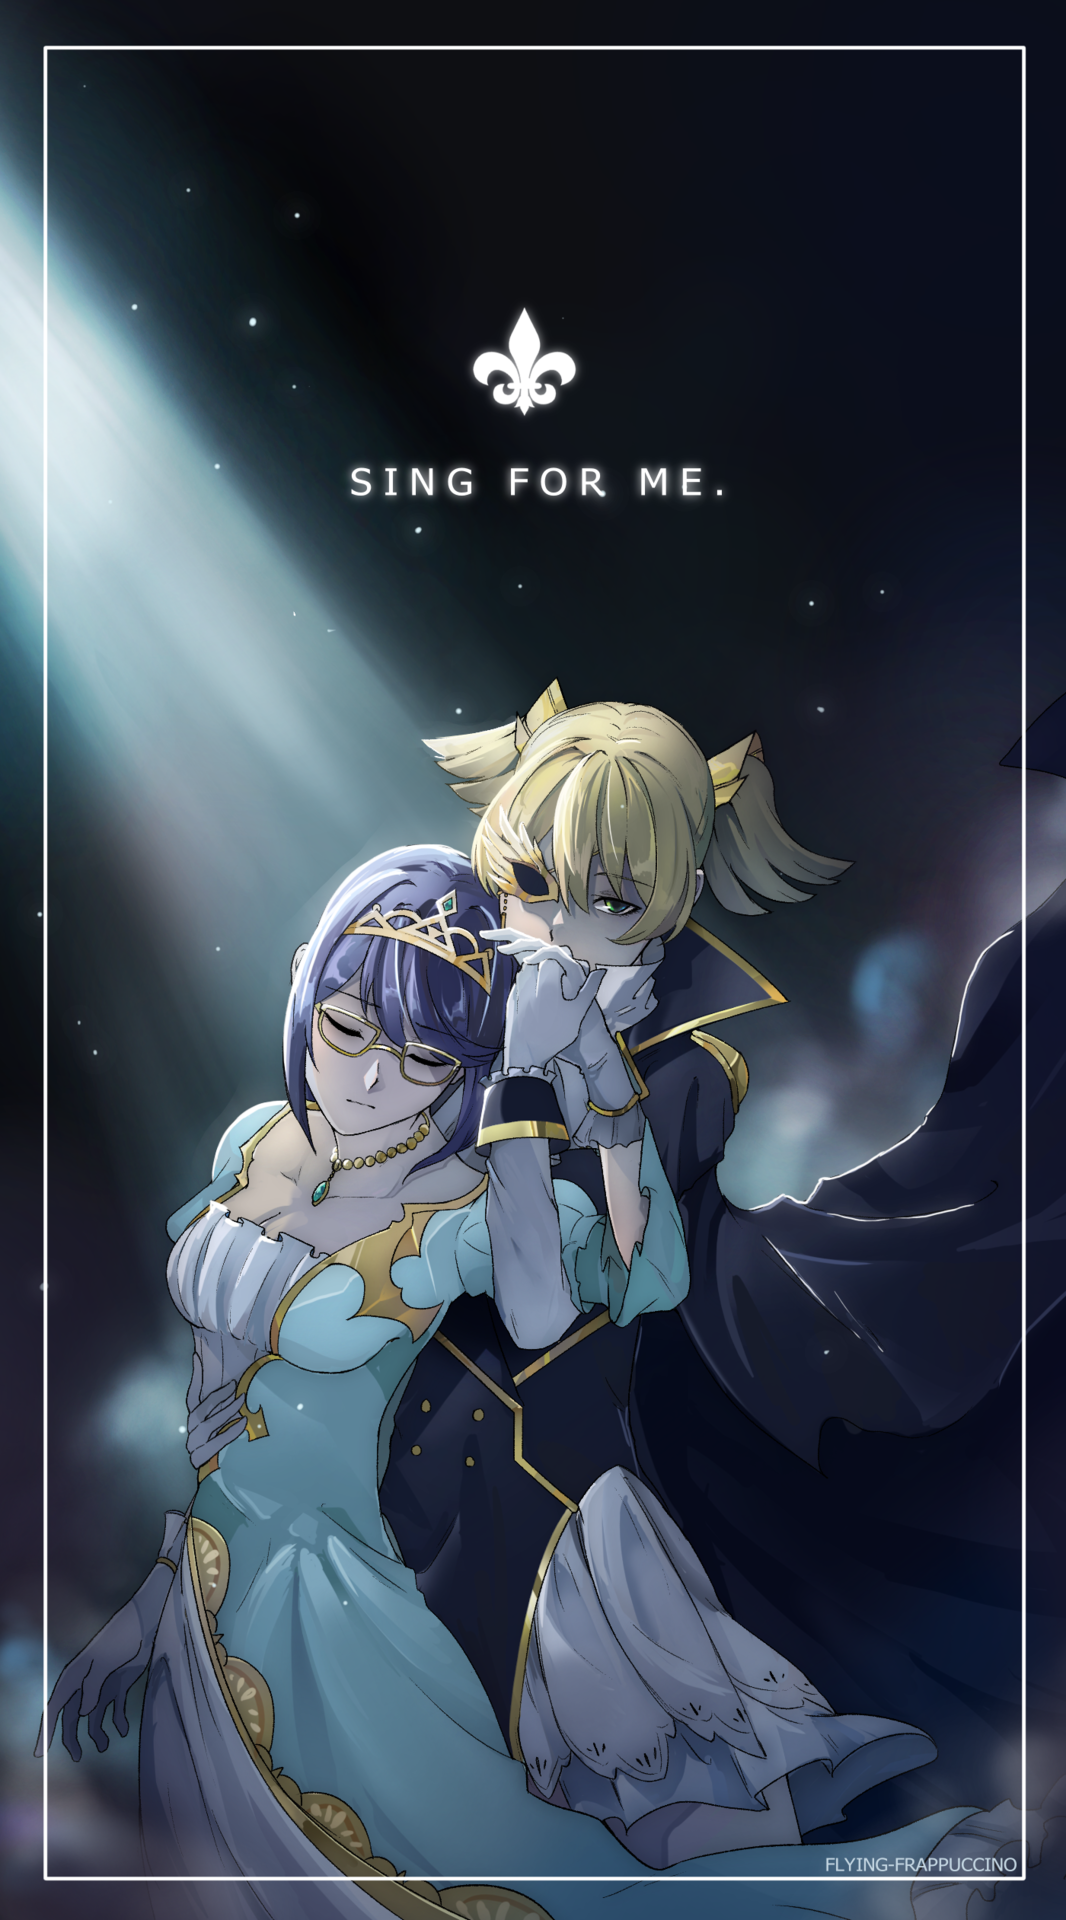 ff123456789 — Sing for me.